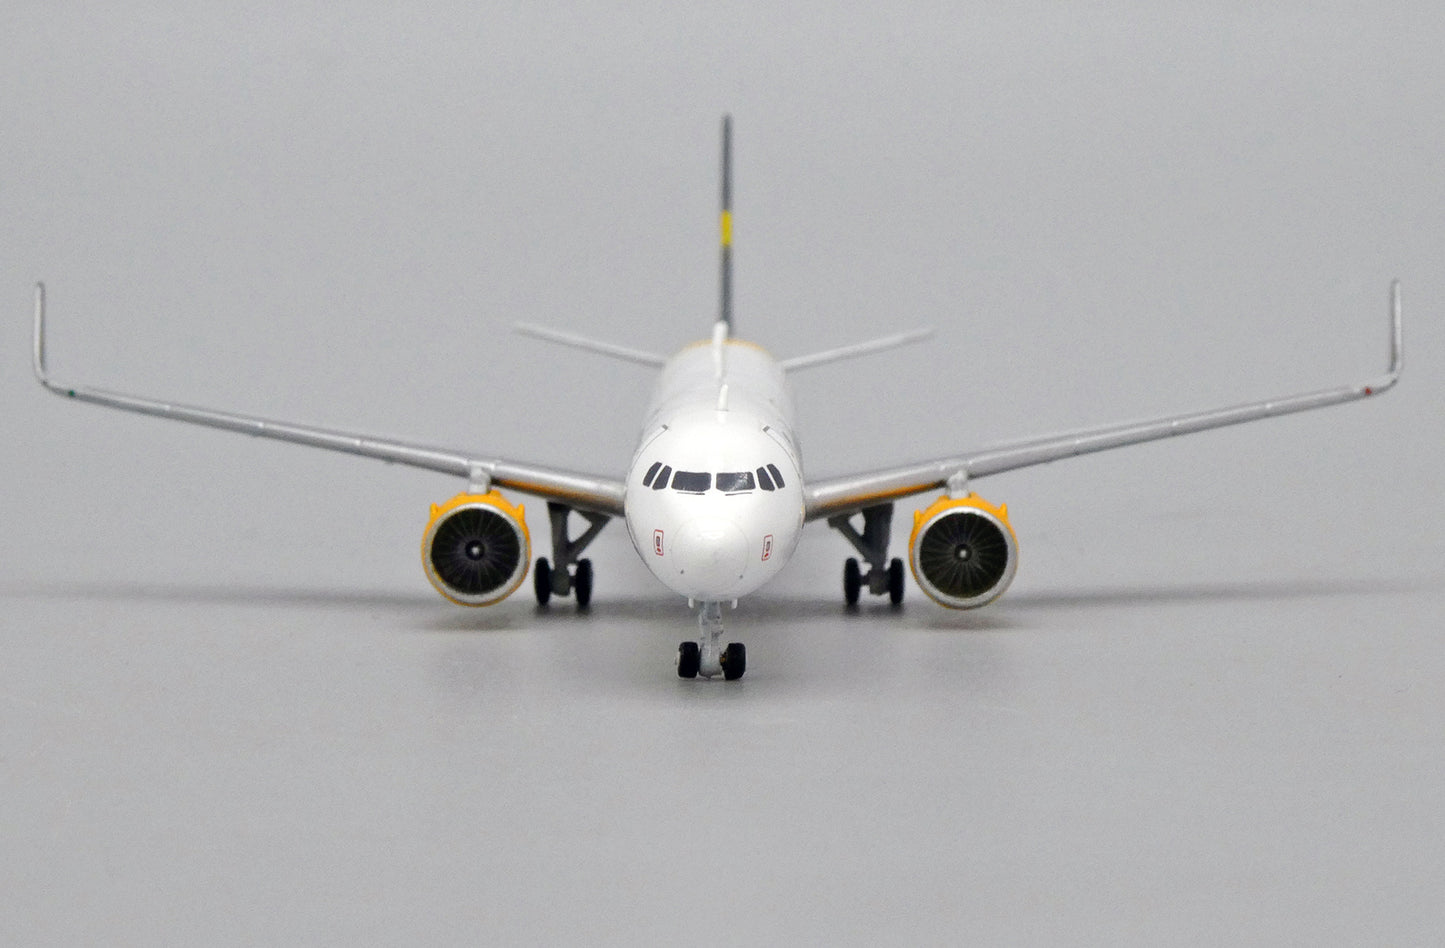 *1/400 Condor A321-200 "Thomas Cook Livery" JC Wings JC4CFG433